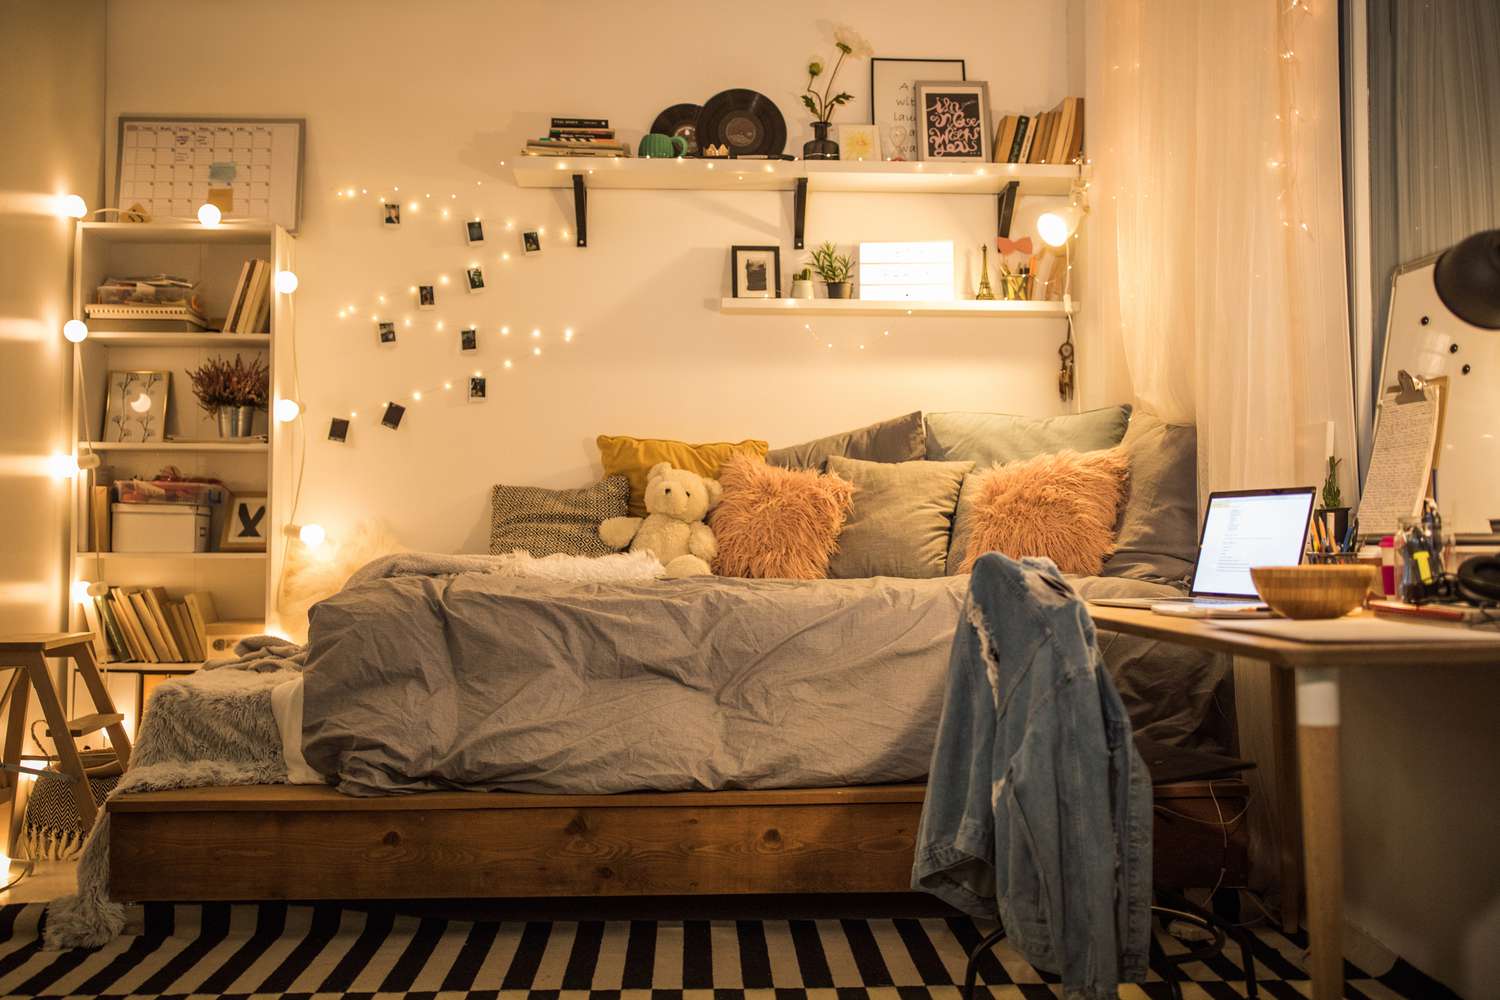 5 Hacks for Organizing Your Dorm Room